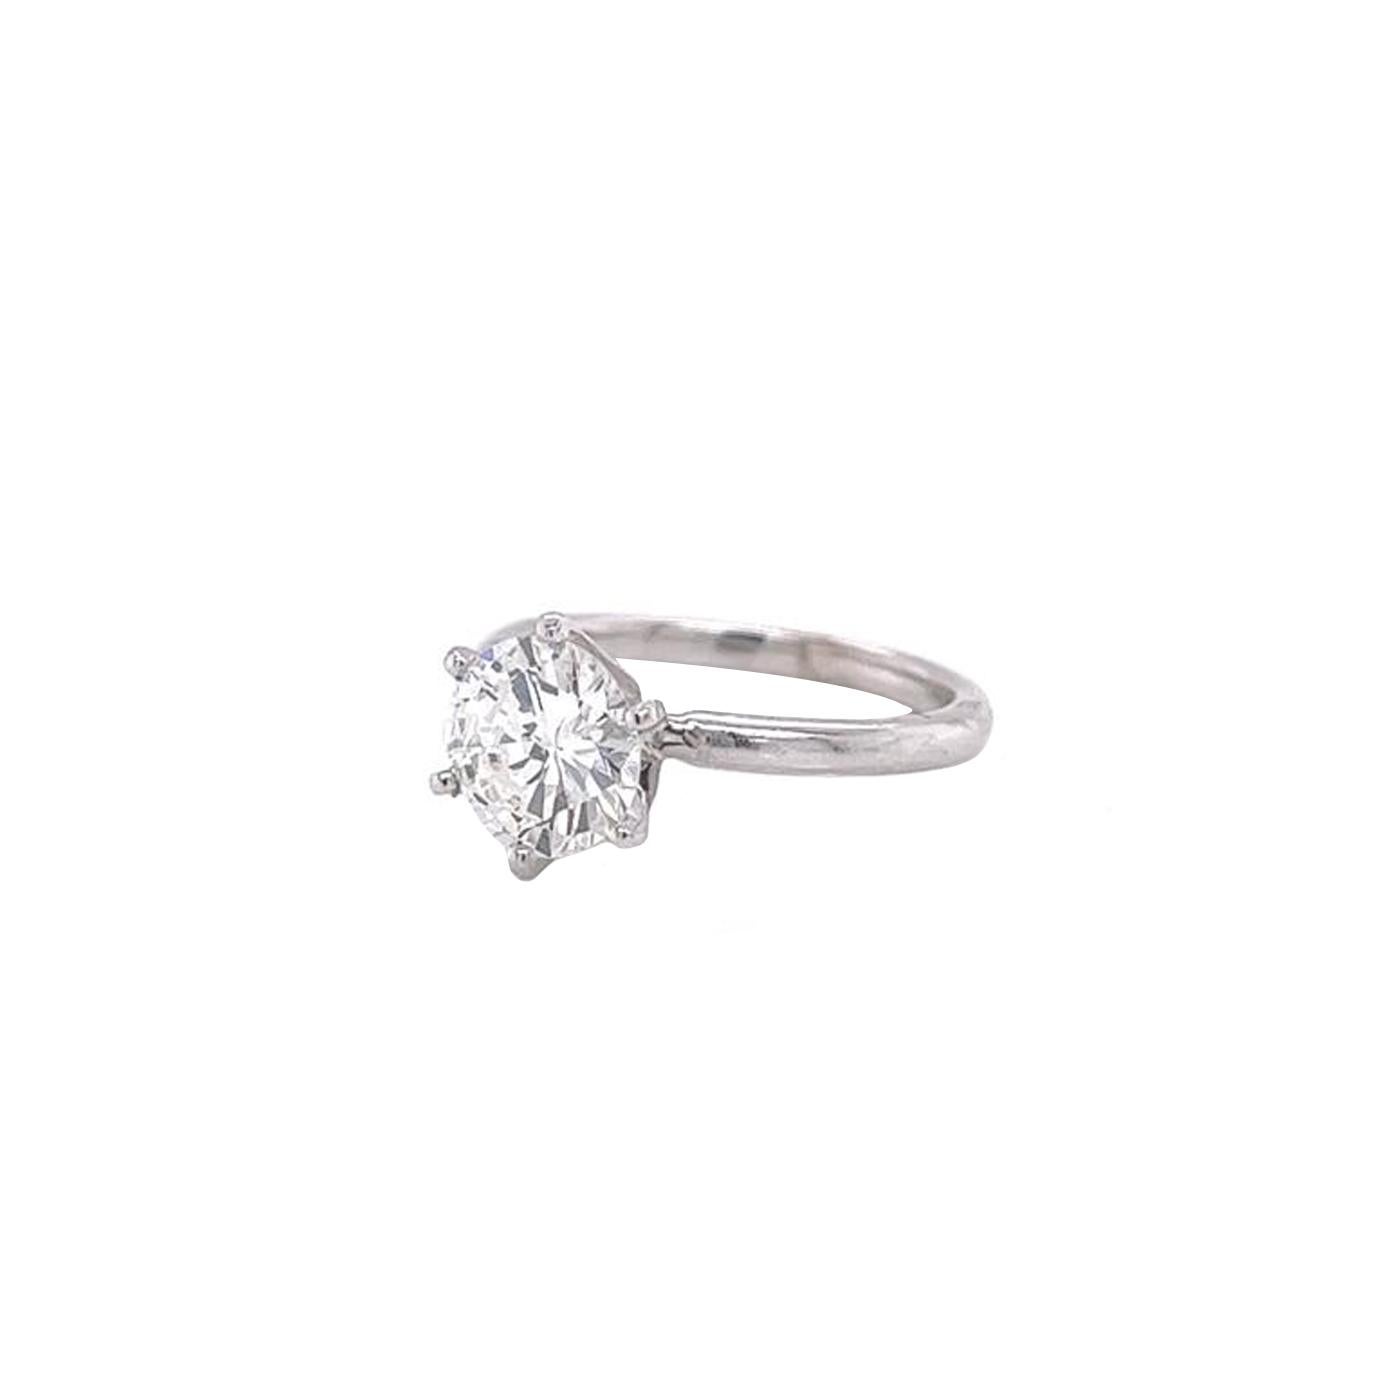 This beautiful Handcrafted Solitaire Diamond Ring Features a 1.25-carat Natural round Brilliant Cut Diamond crafted in 18 Karat Gold with dimensions of 7.18 - 7.29 x 4.05mm. It has a Round Main Stone, a VS1 clarity grade with H Color, GIA Certified